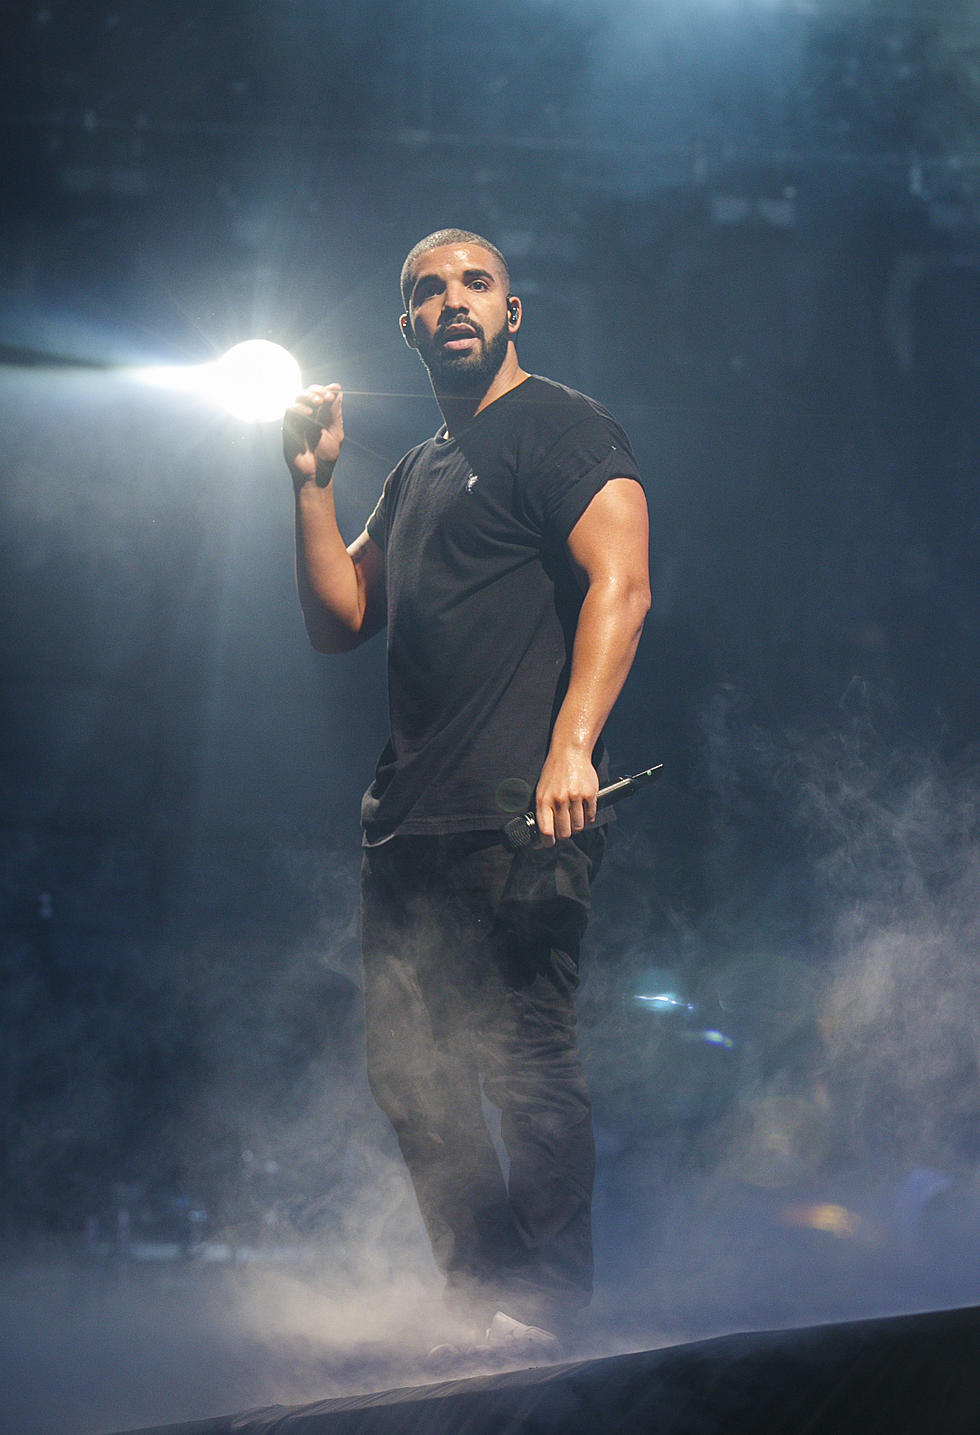 [VIDEO] See Drake’s ResponseTo Crowd Chanting “F Meek Mill” at OVO Fest in Toronto